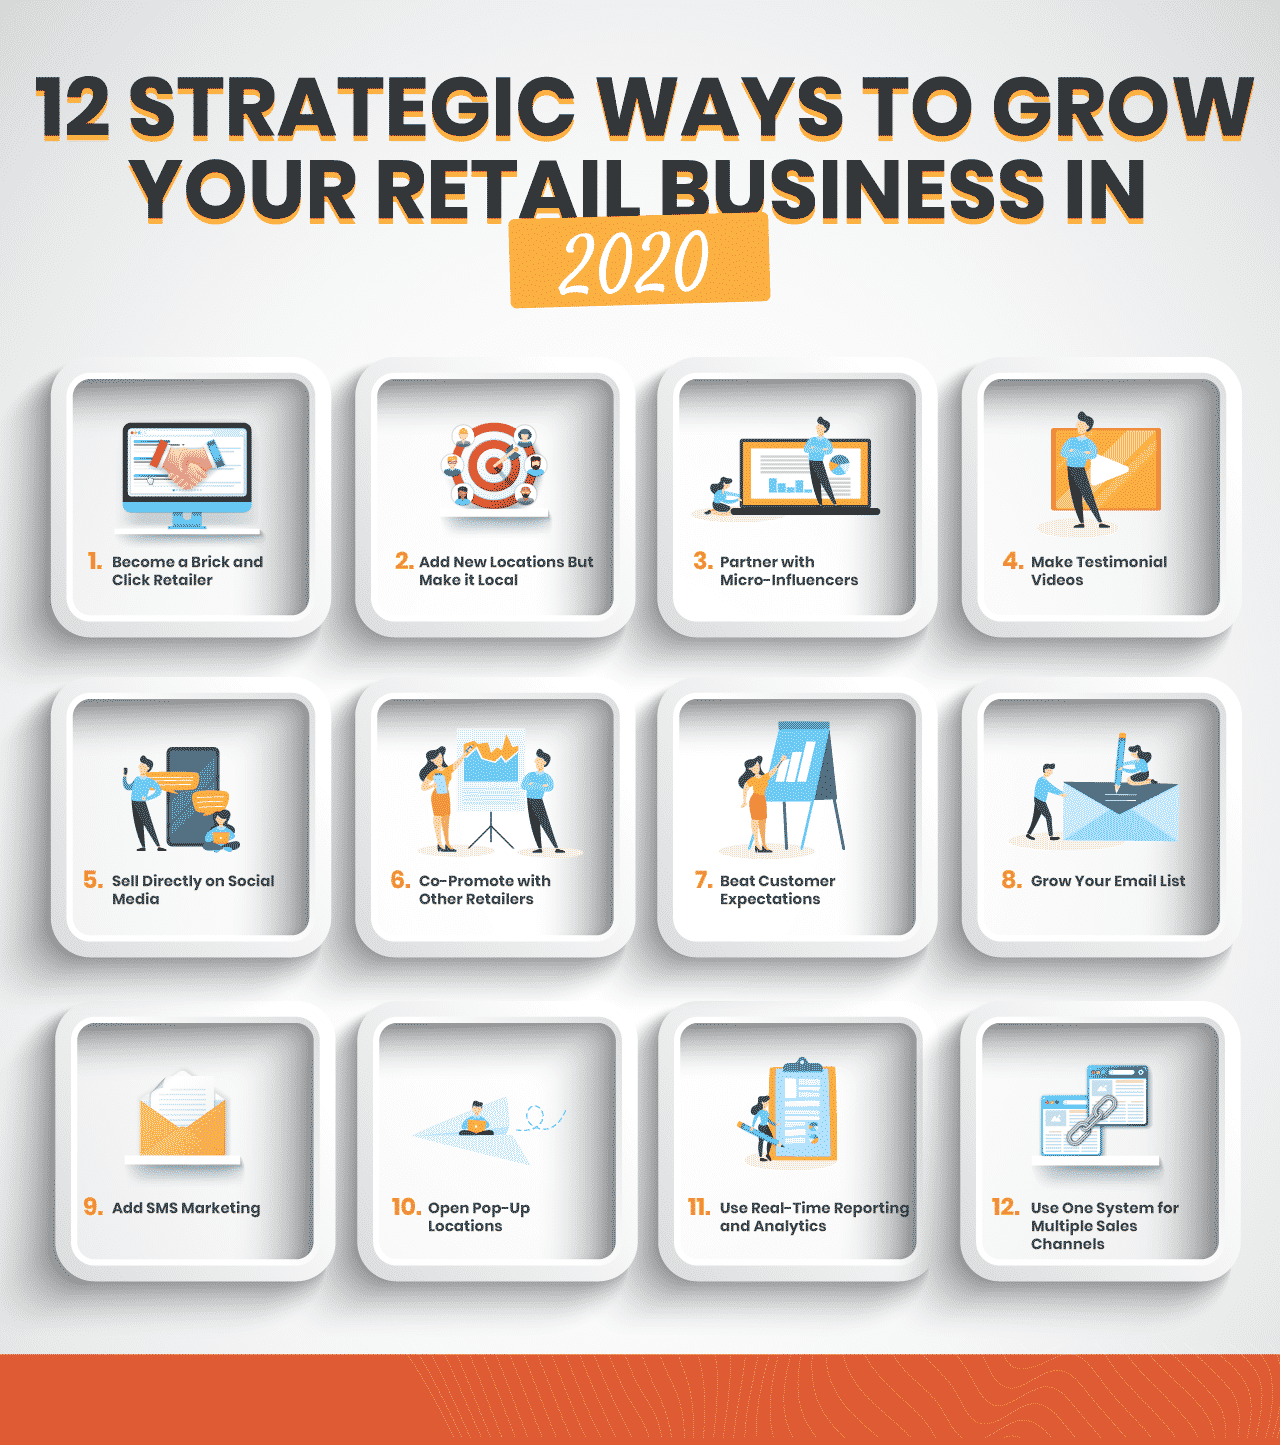 12 Strategic ways to grow your retail business in 2021 infographic with 12 icons representing each way